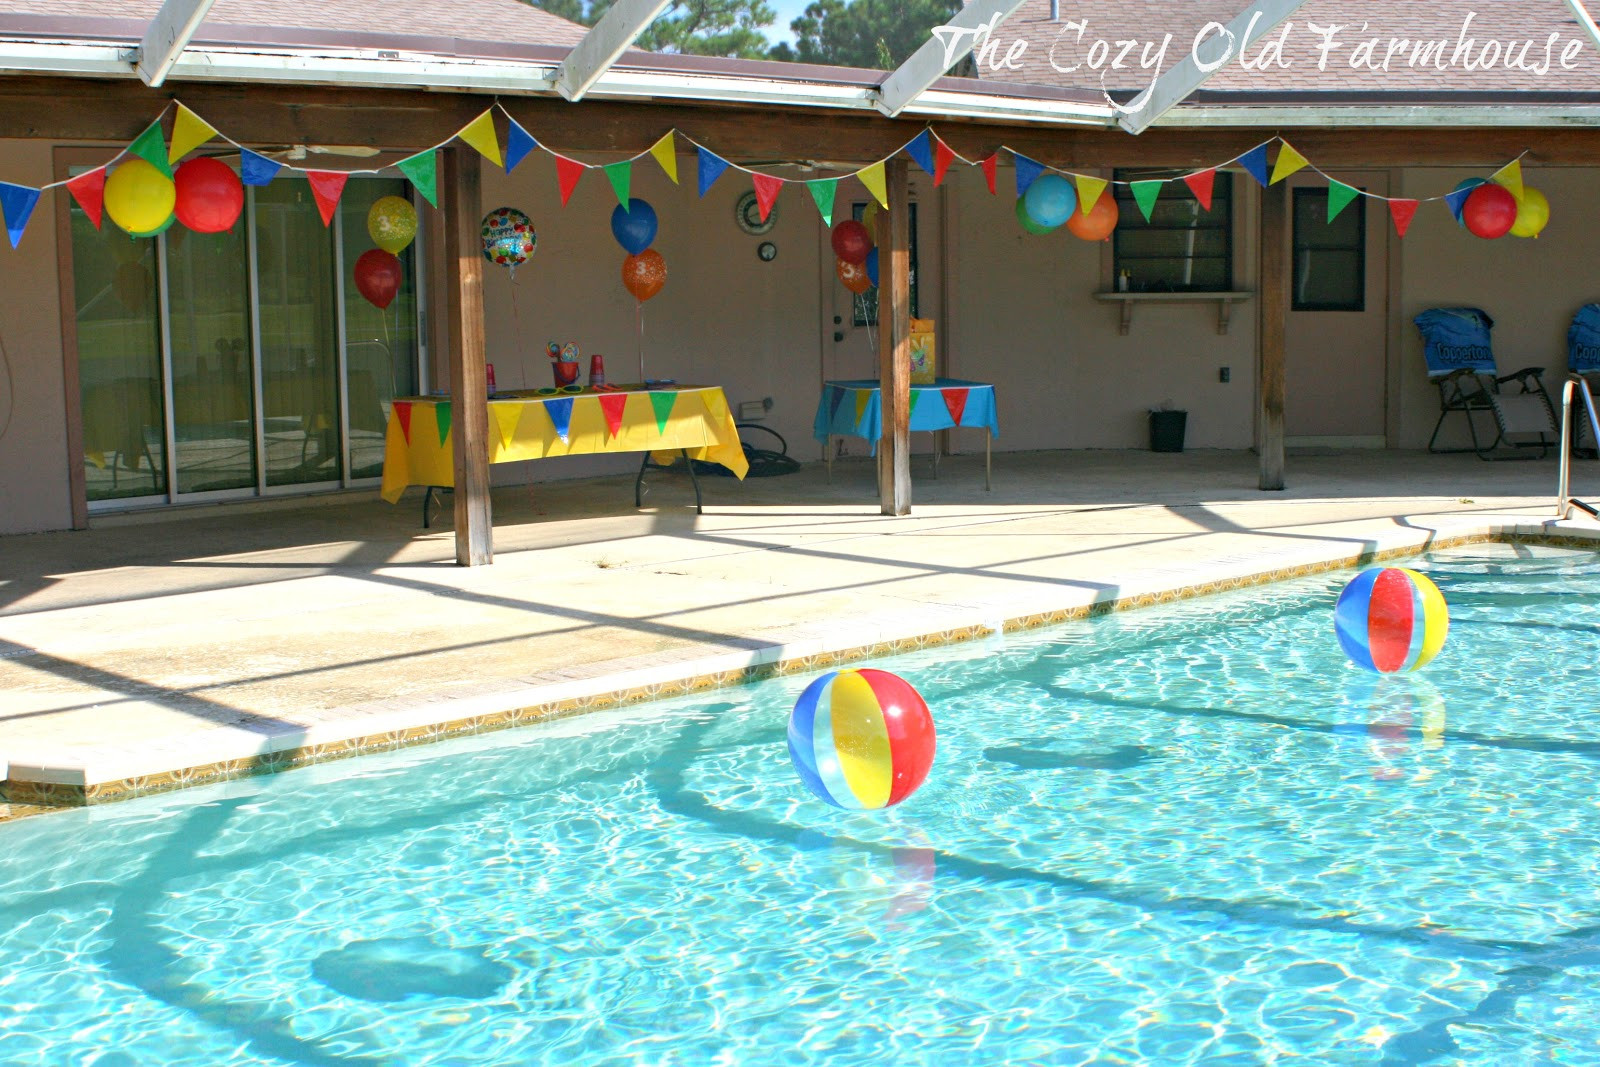 Pool Party Ideas For Birthdays
 The Cozy Old "Farmhouse" Simple and Bud Friendly Pool